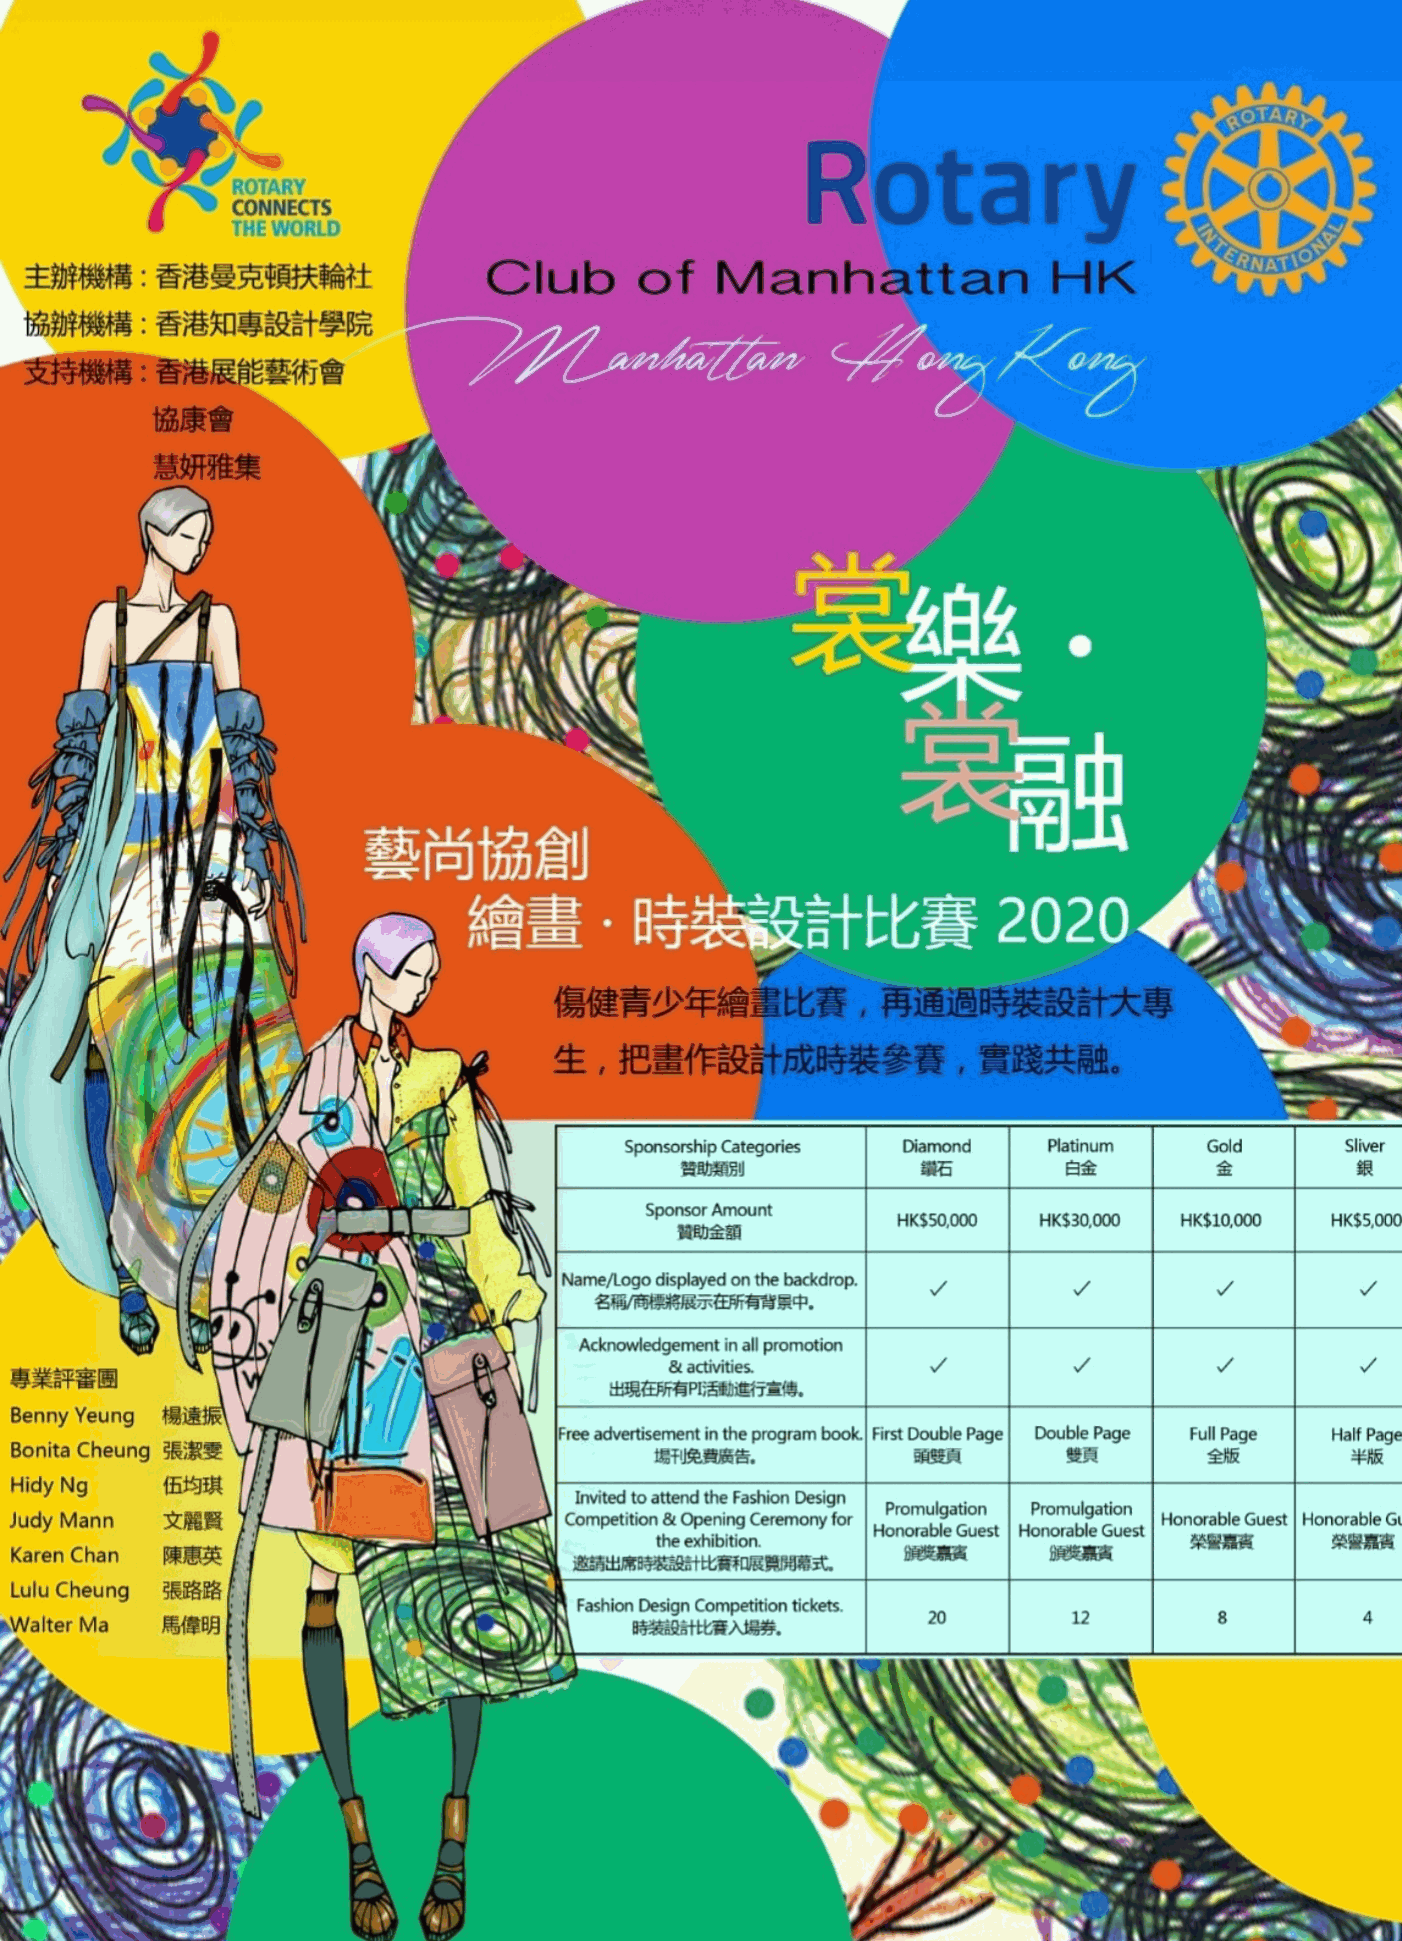 Rotary Fashion Design & Drawing for Talents 